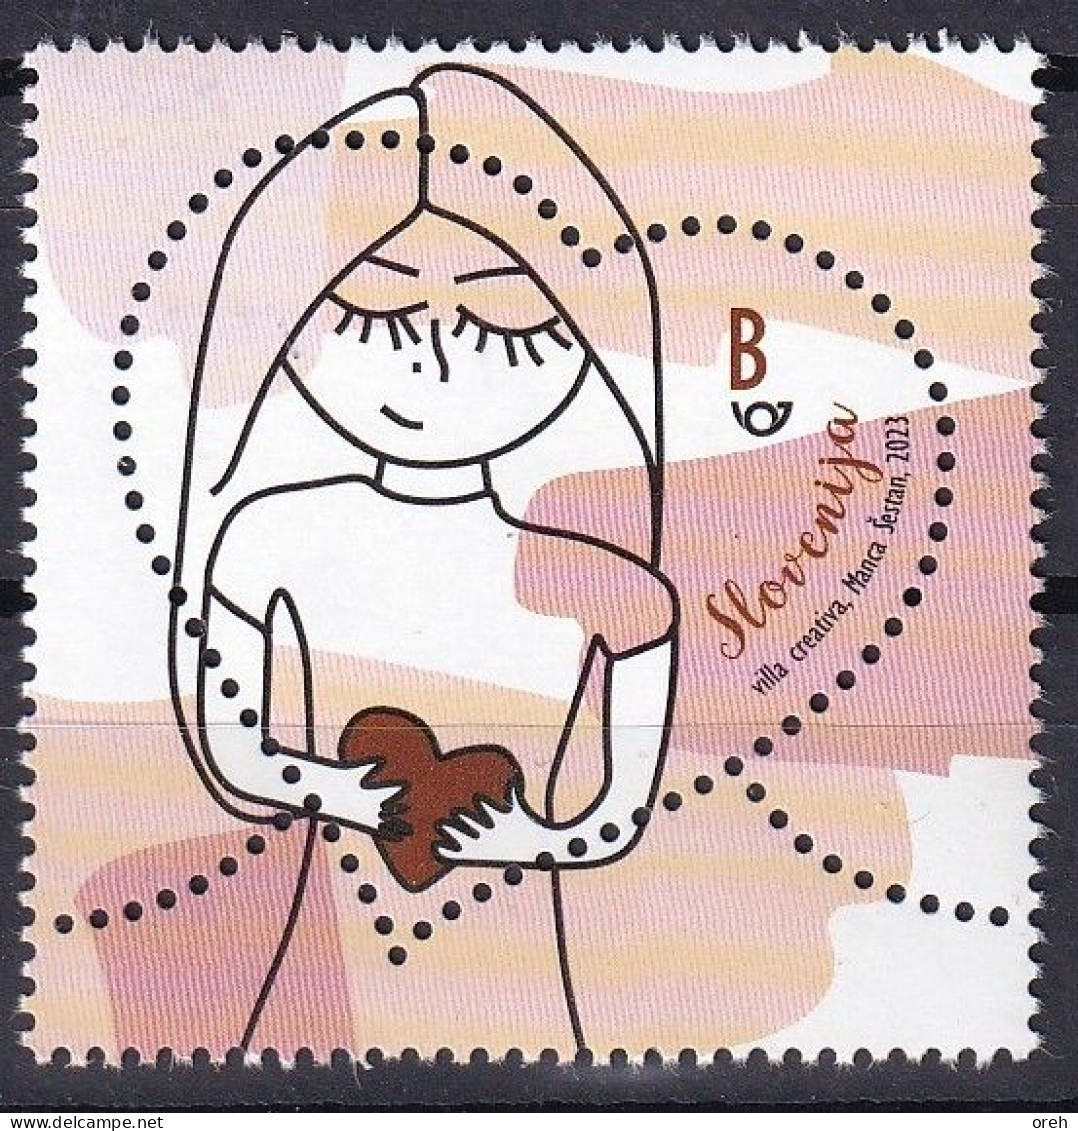 SLOVENIA,SLOWENIEN 2023,LOVE STAMPS,GREETING STAMP,LOVE GIVES BIRTH TO LOVEHEART,,MNH - Slovénie